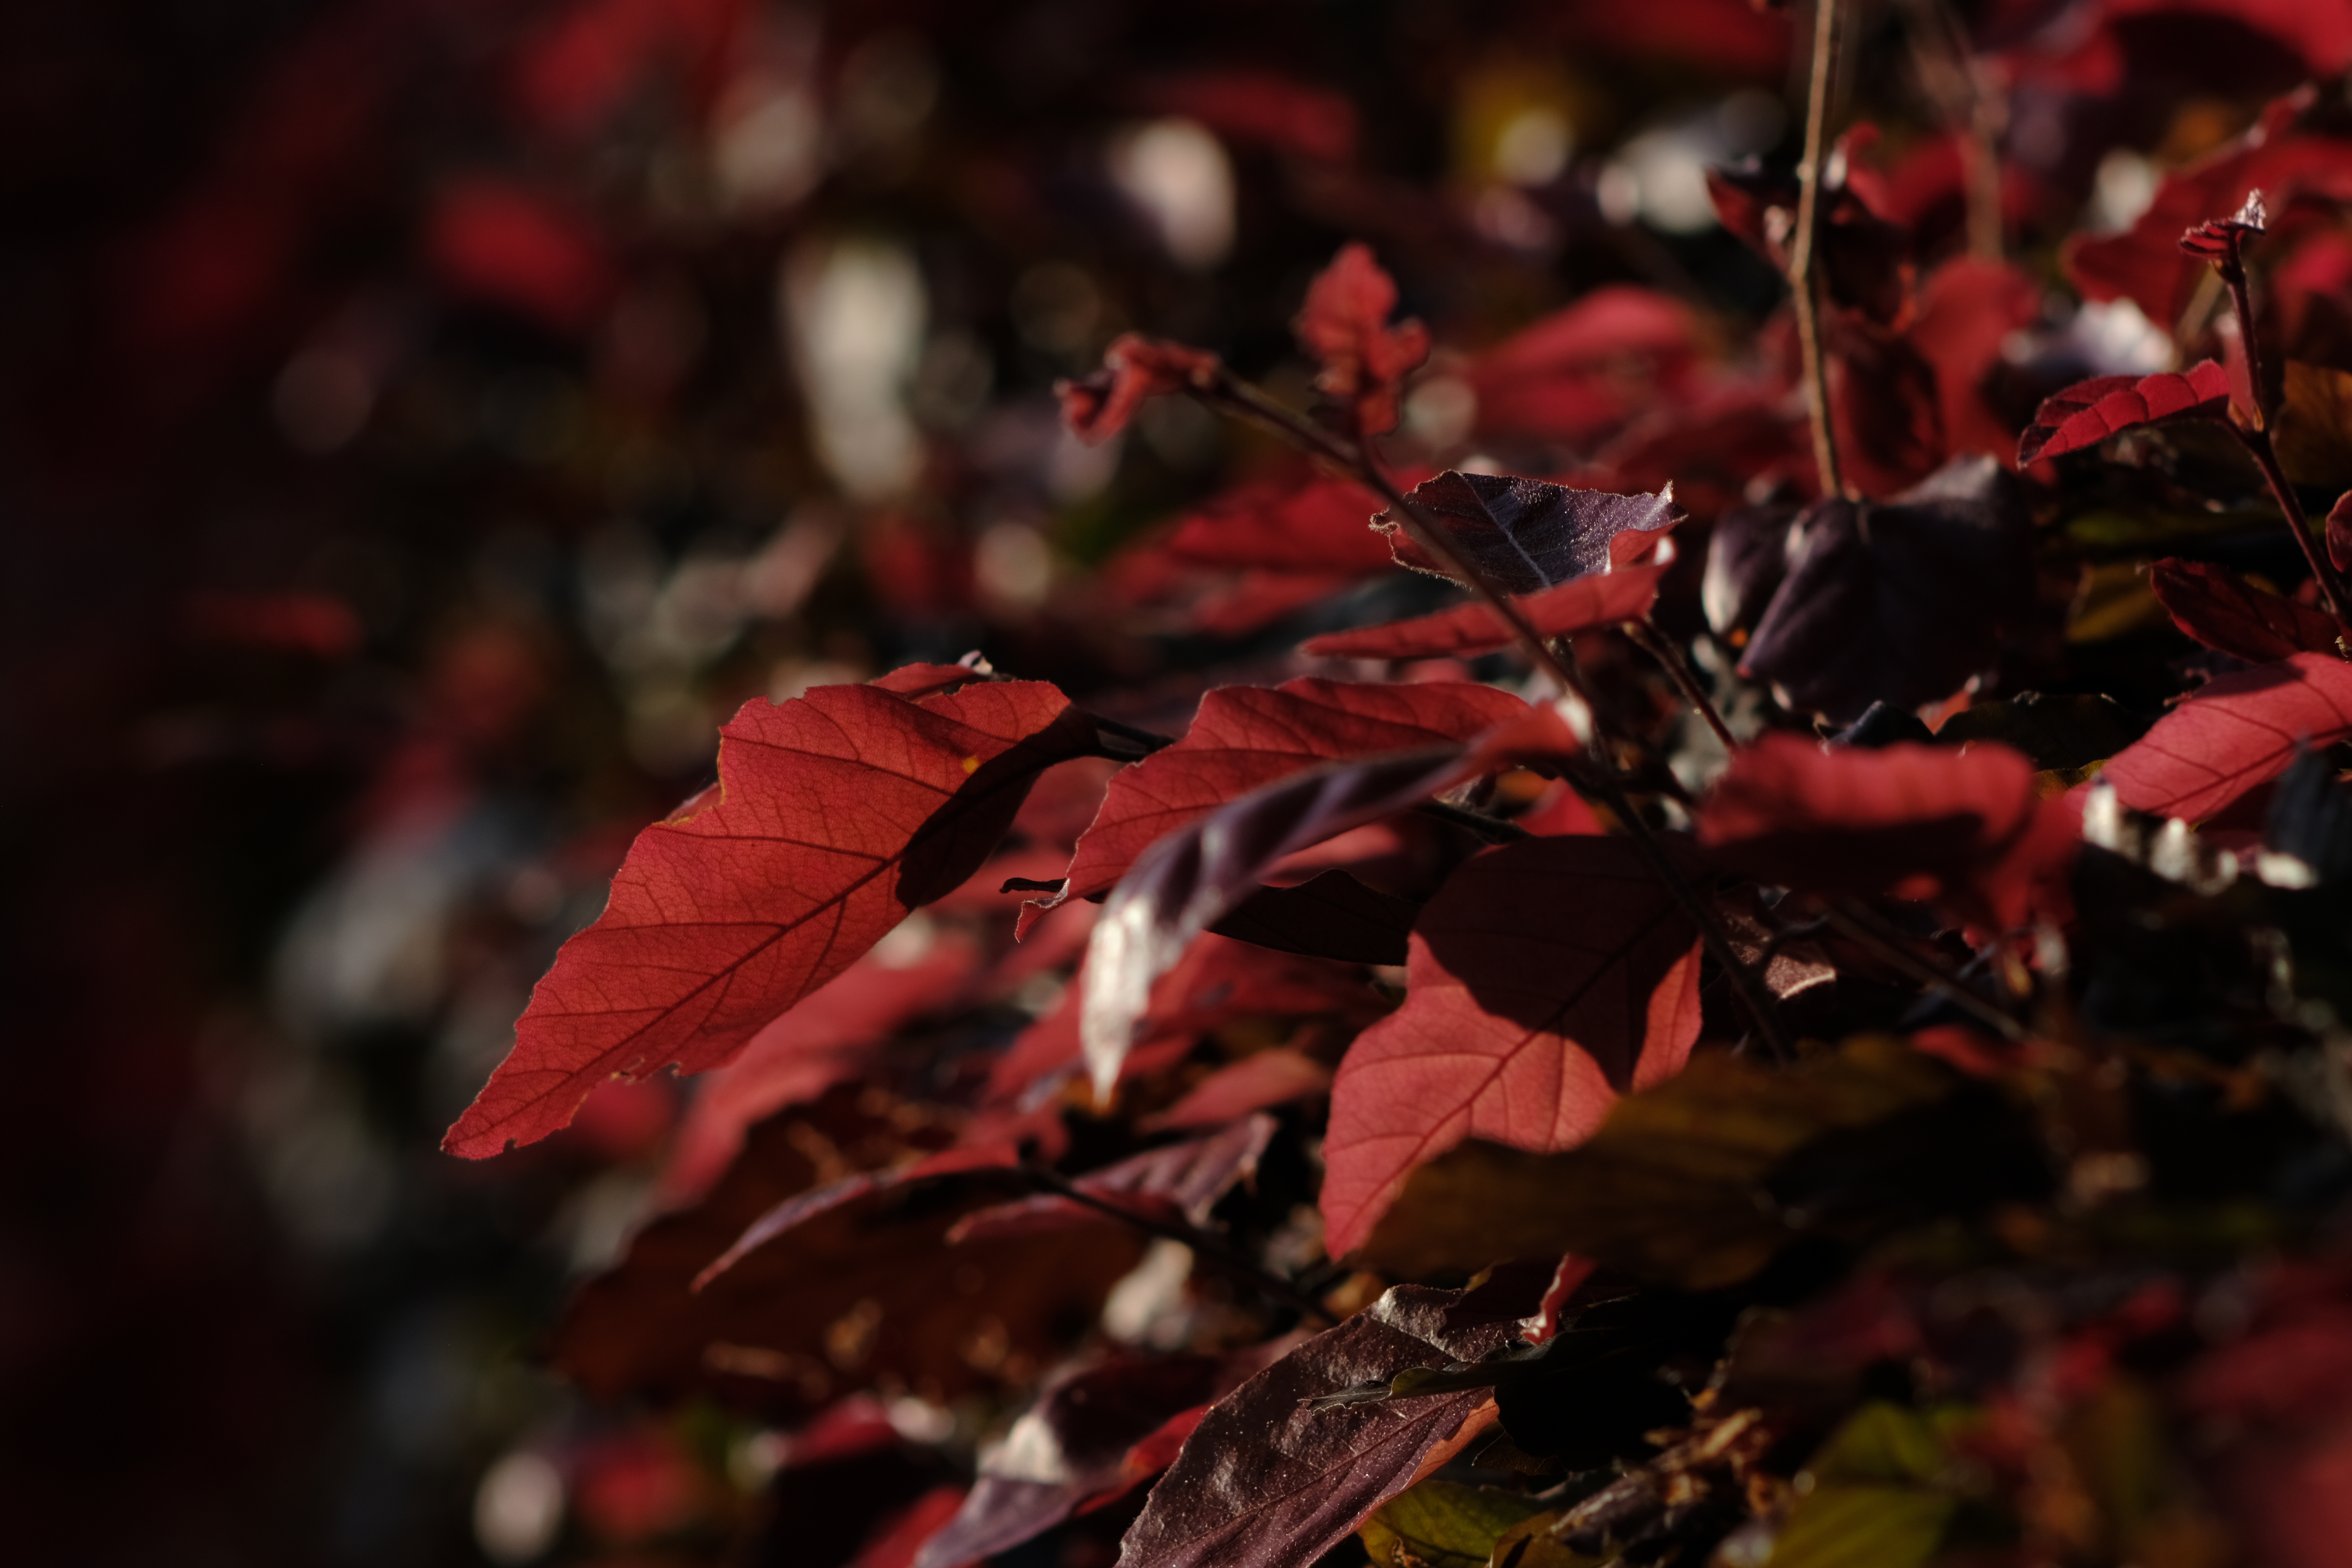 General 6240x4160 nature red leaves hedges contrast depth of field photography